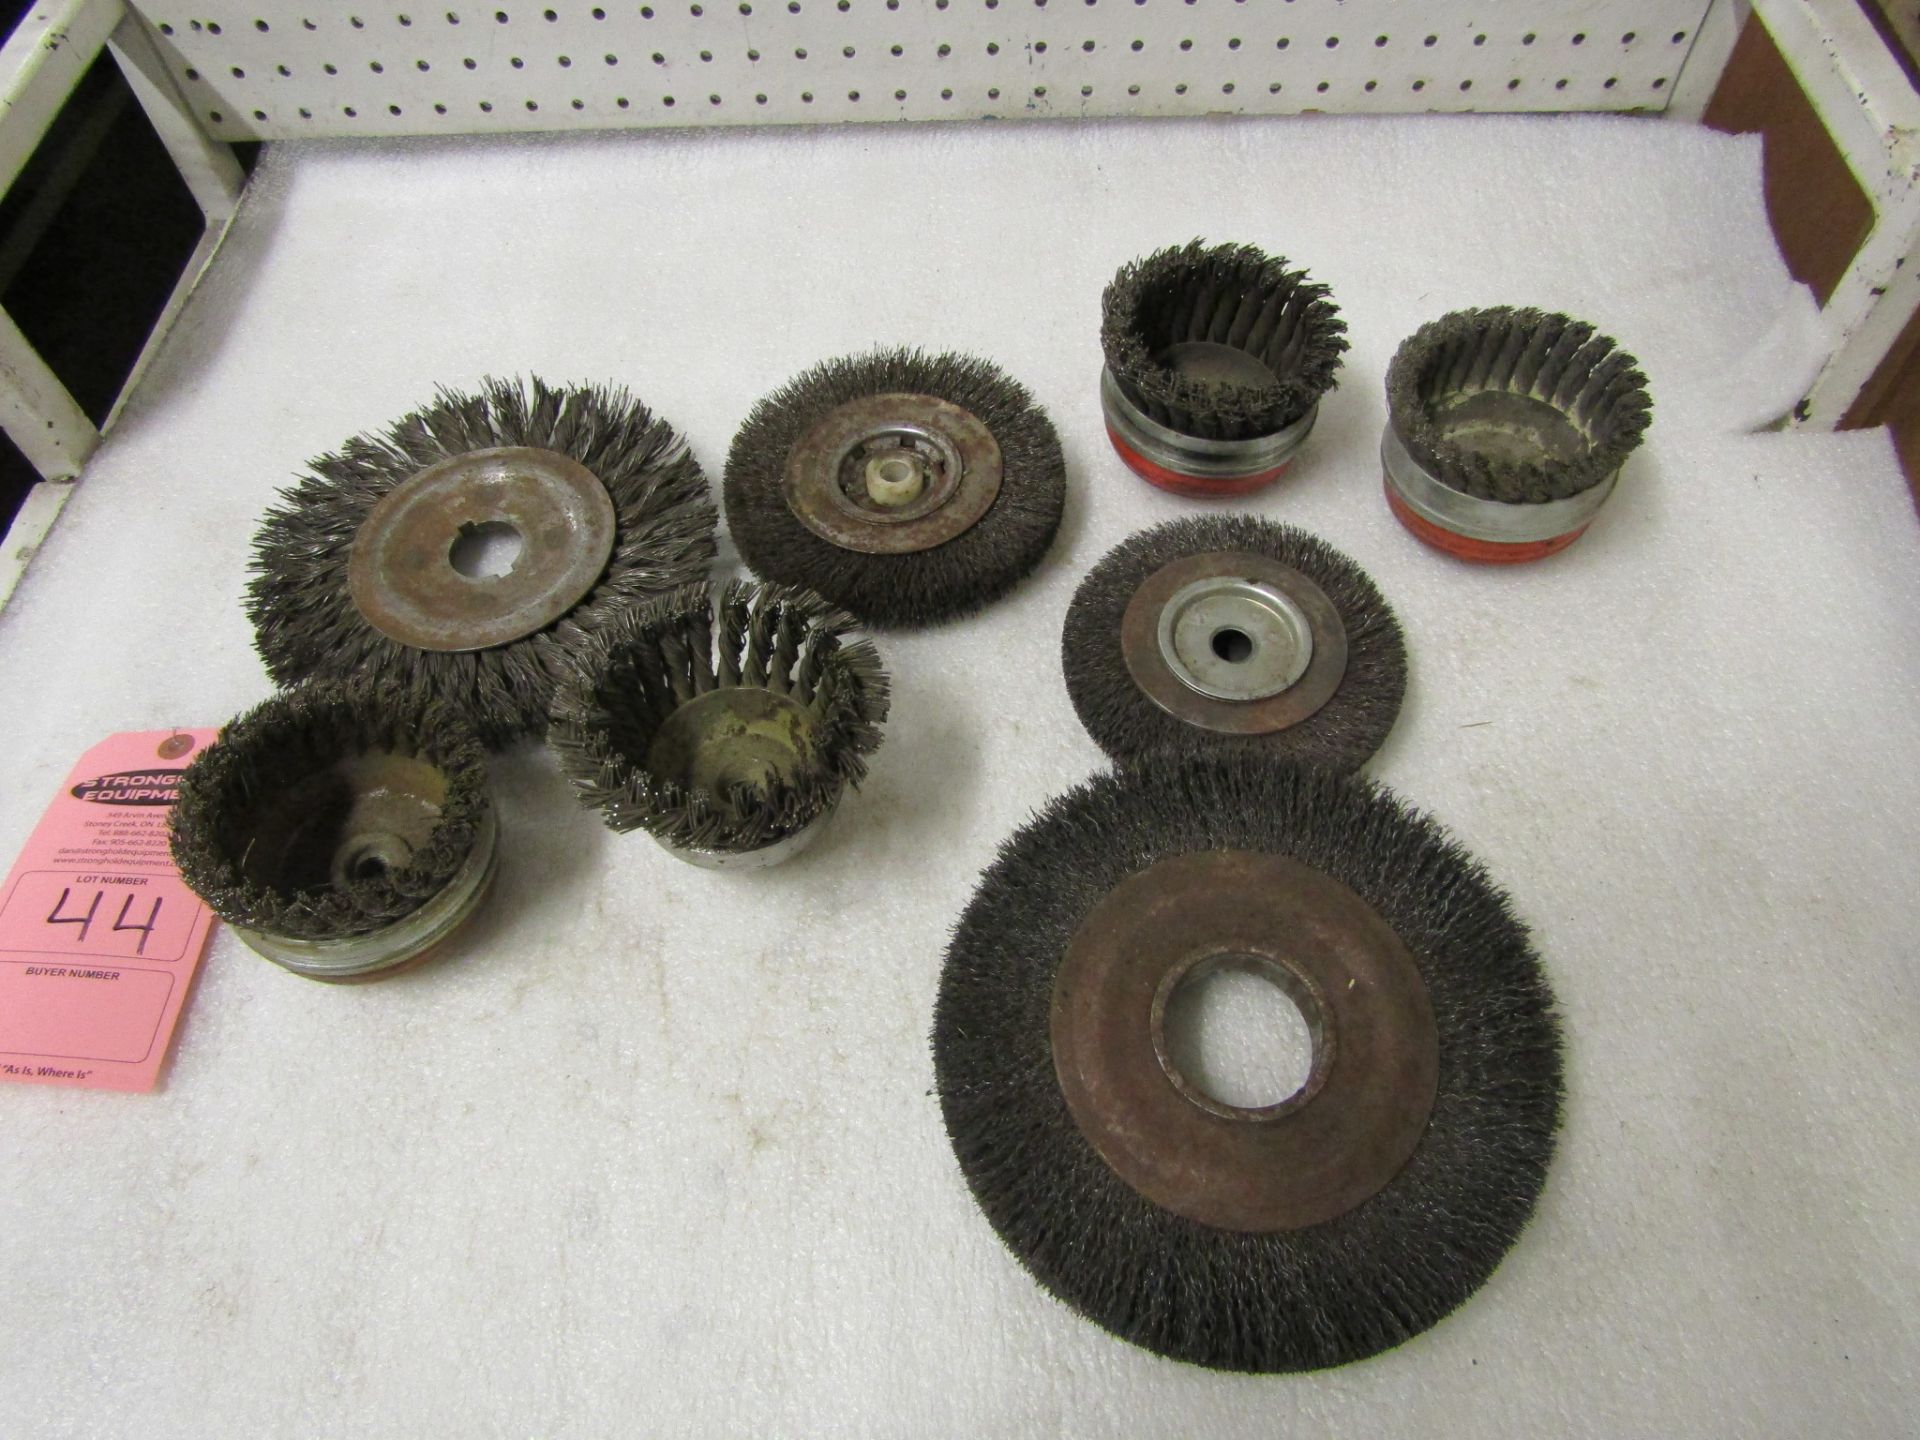 Lot of Steel wire brushes and grinder attachments